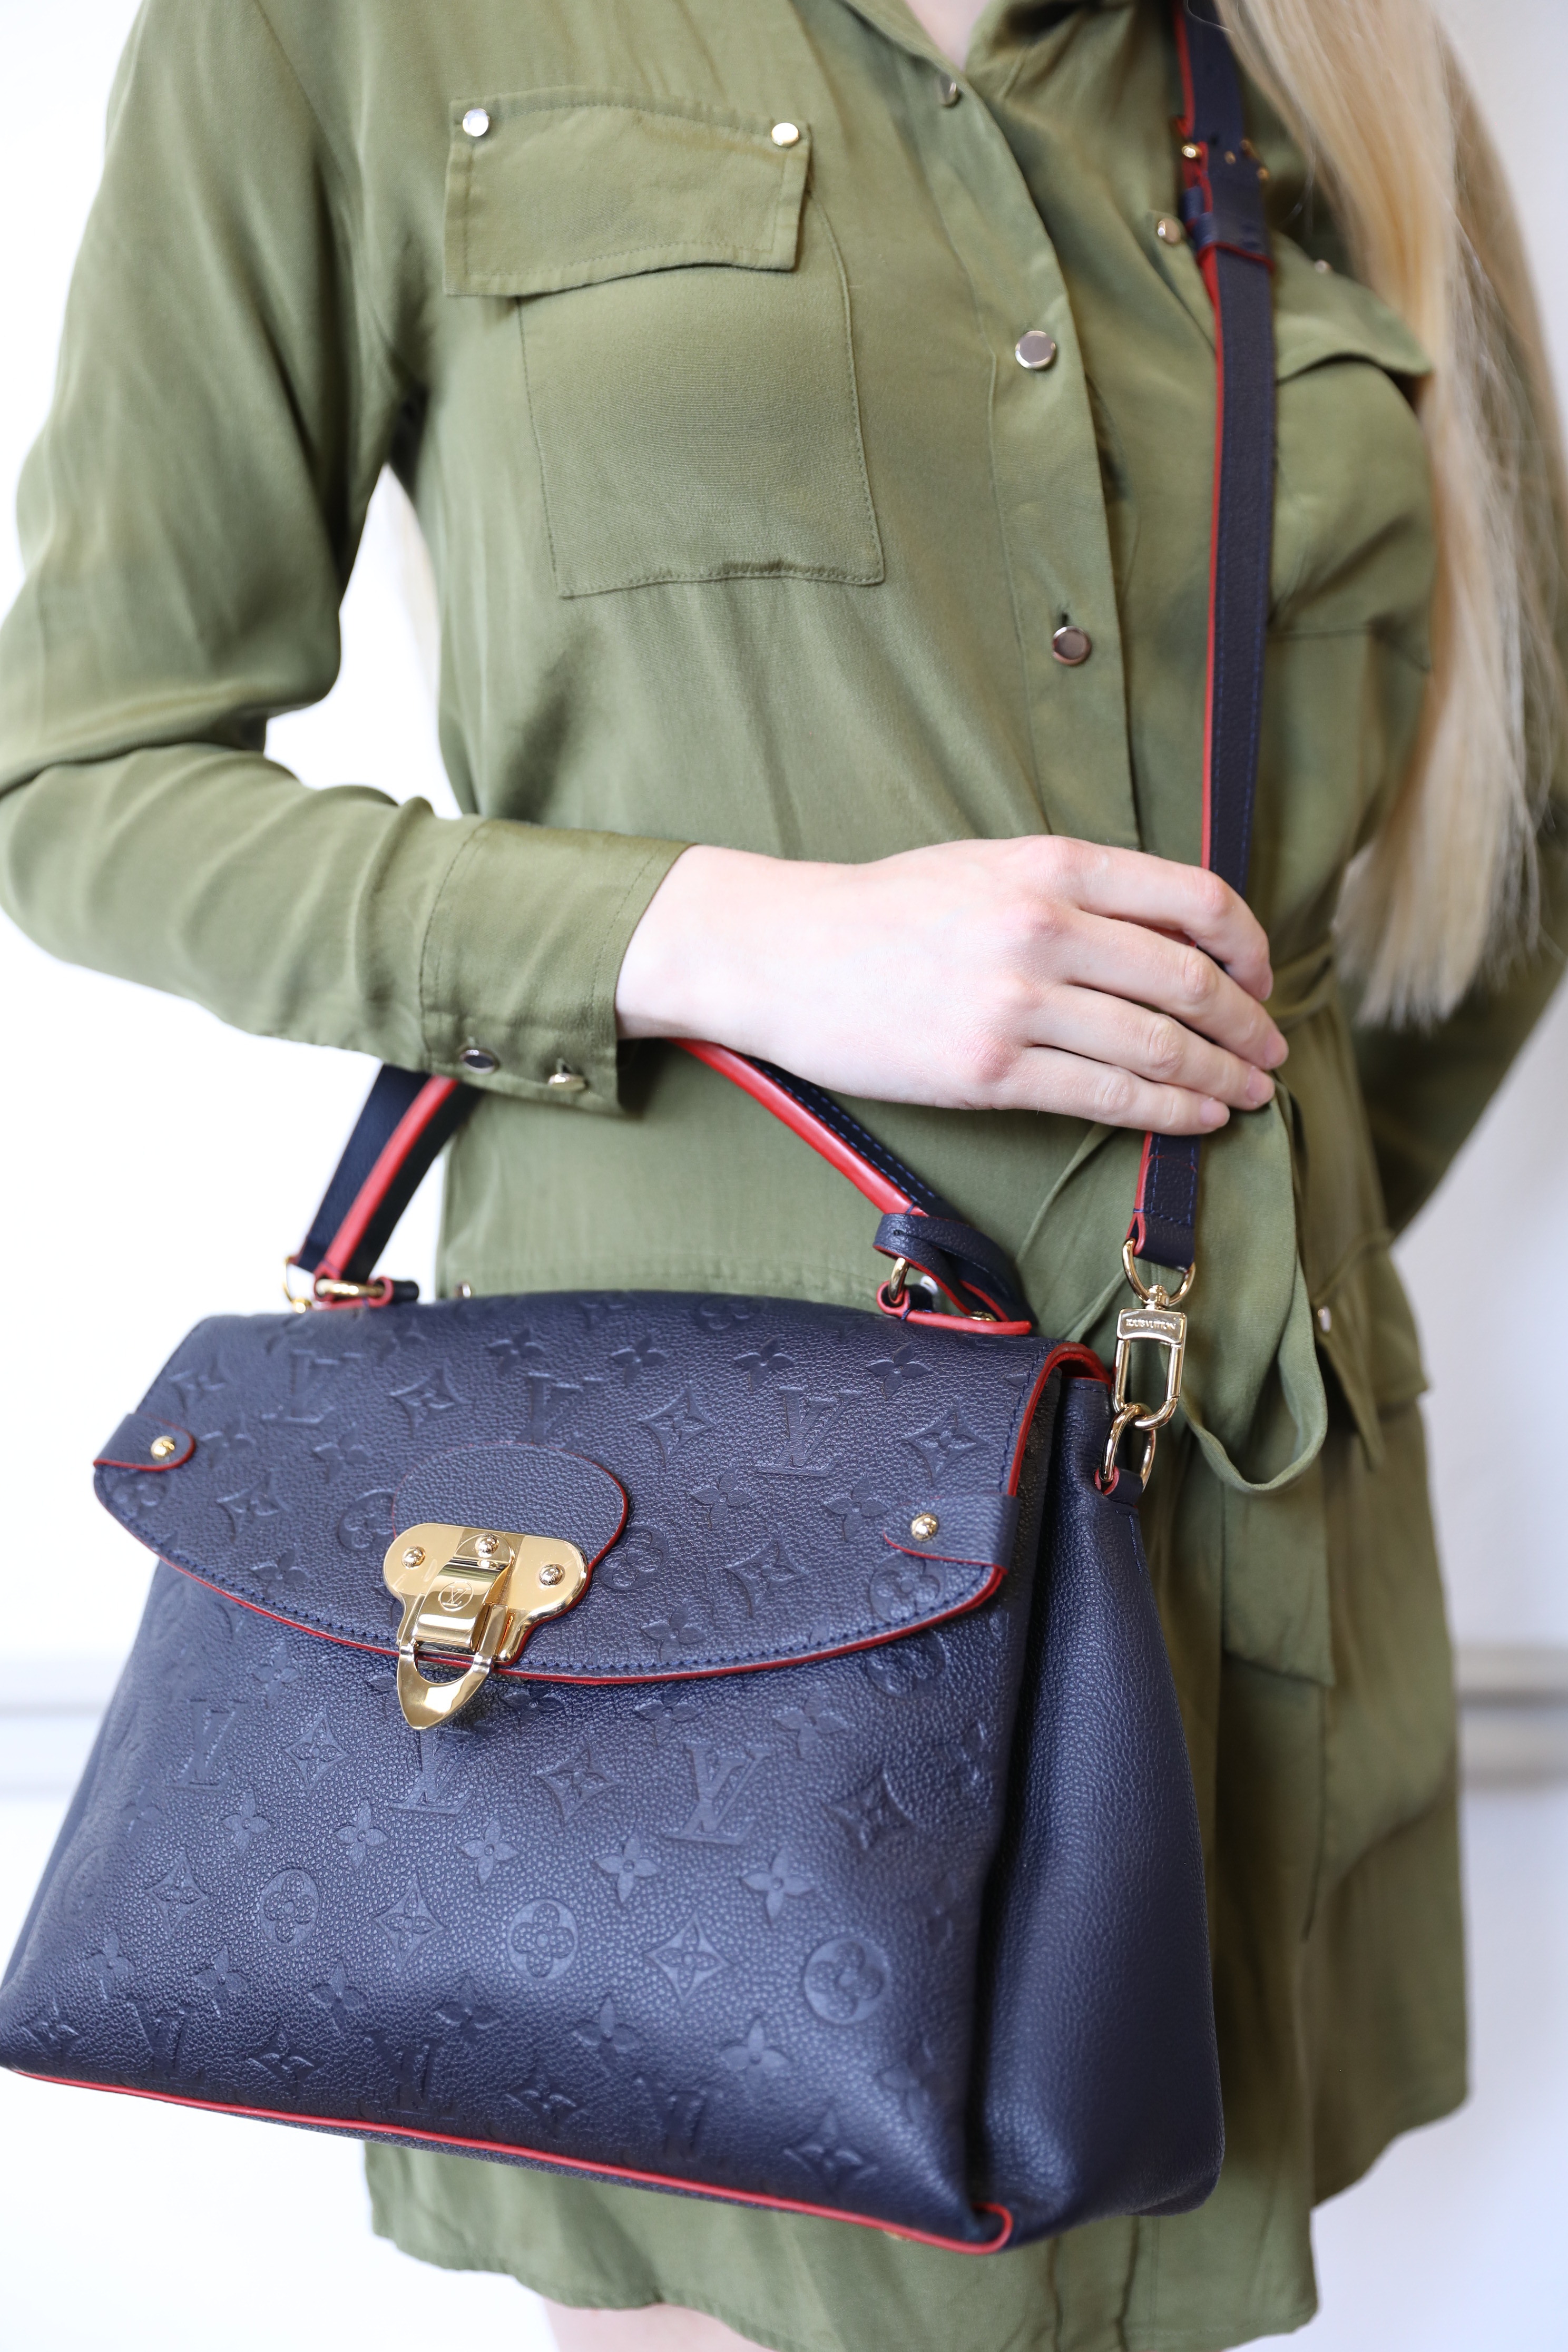 🌟🌟LOUIS VUITTON 🌟this is the georges mm empreinte leather bag